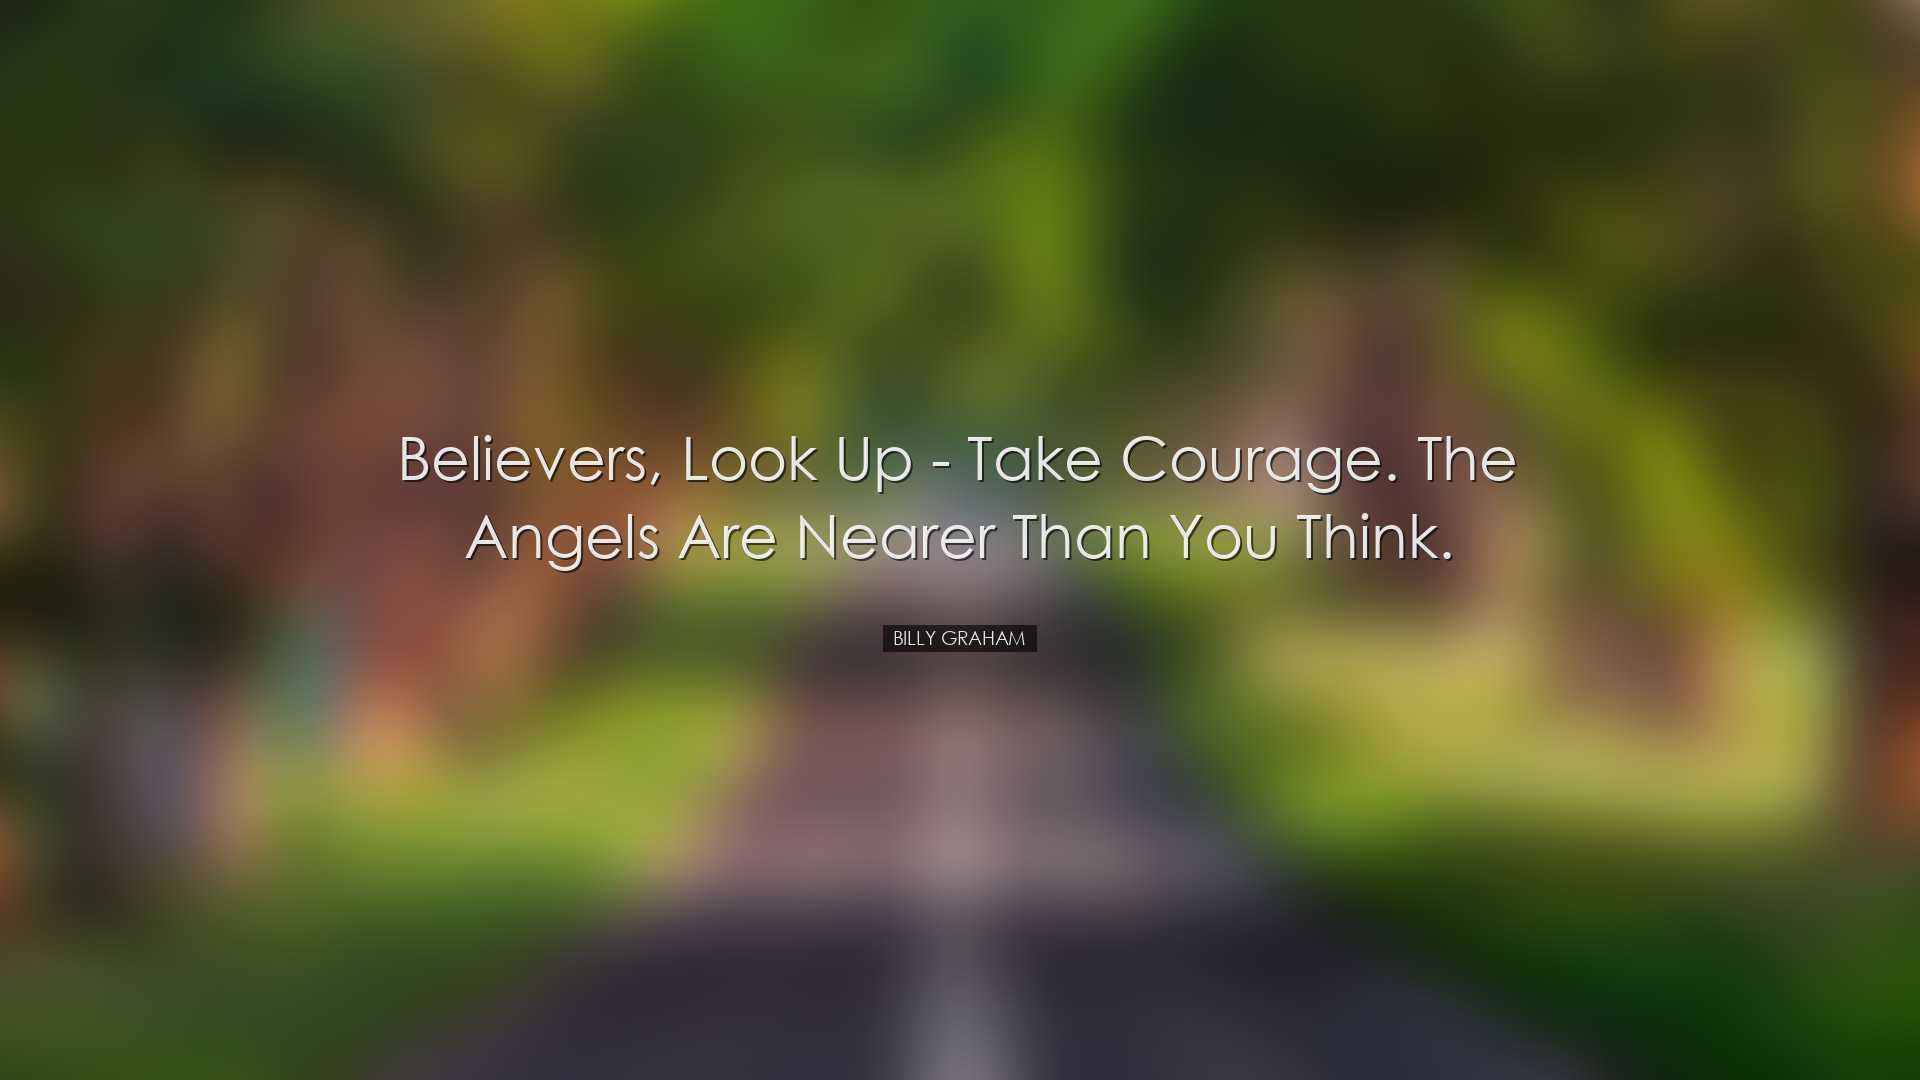 Believers, look up - take courage. The angels are nearer than you